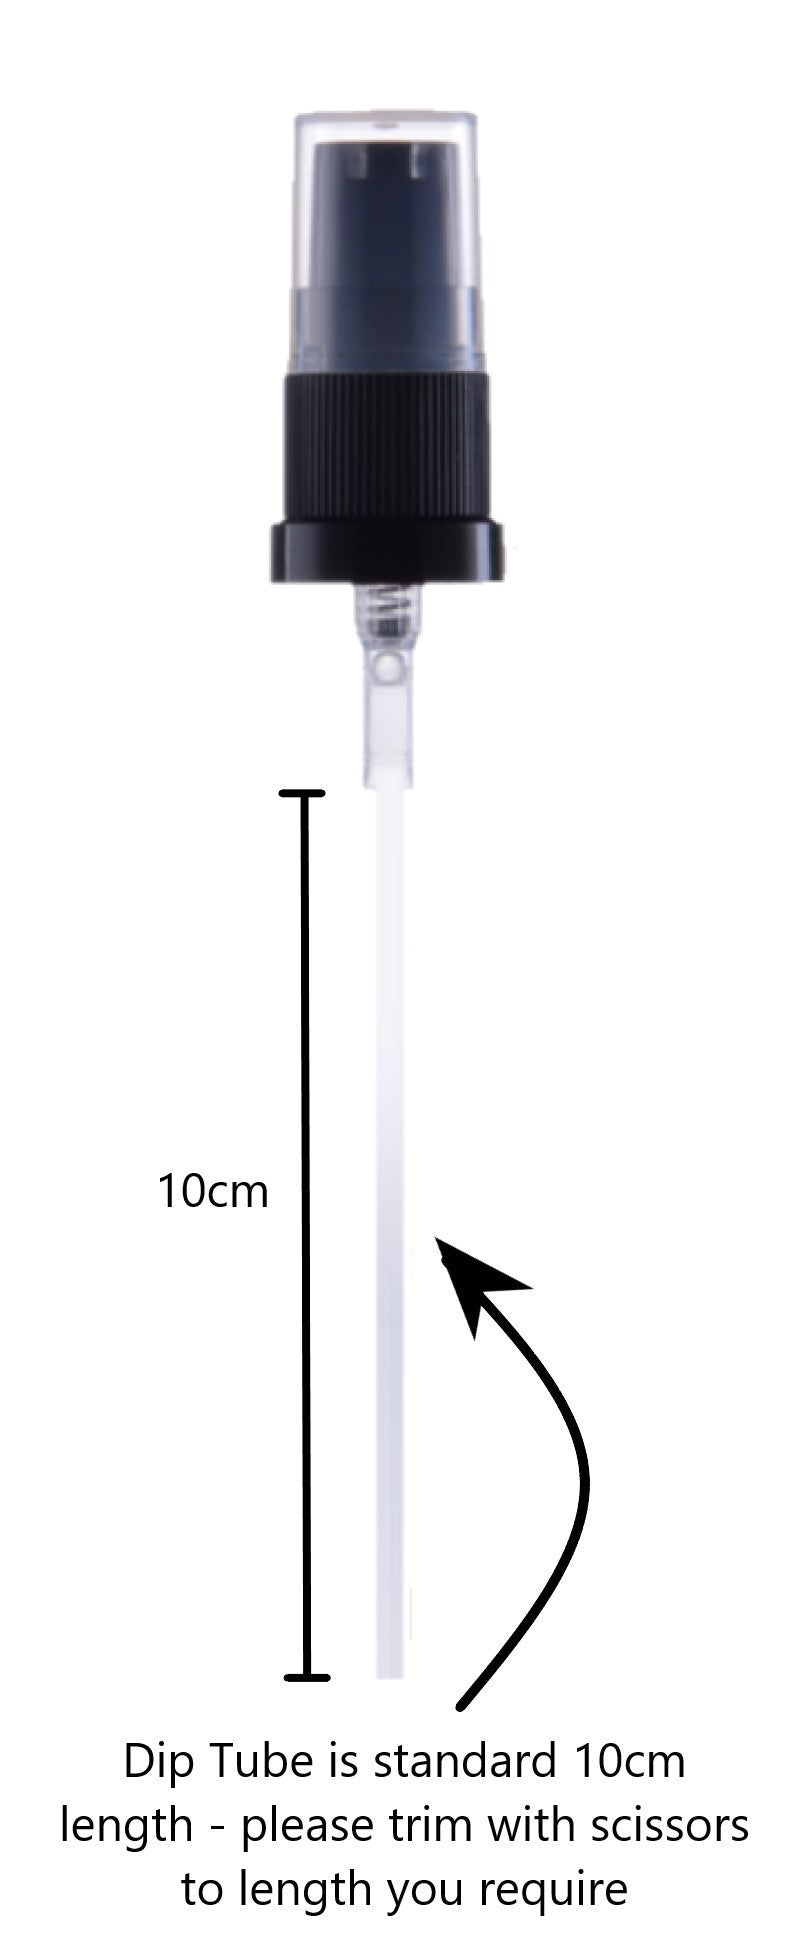 10ml Clear Glass Bottles with Black Treatment Pump with Clear Overcap